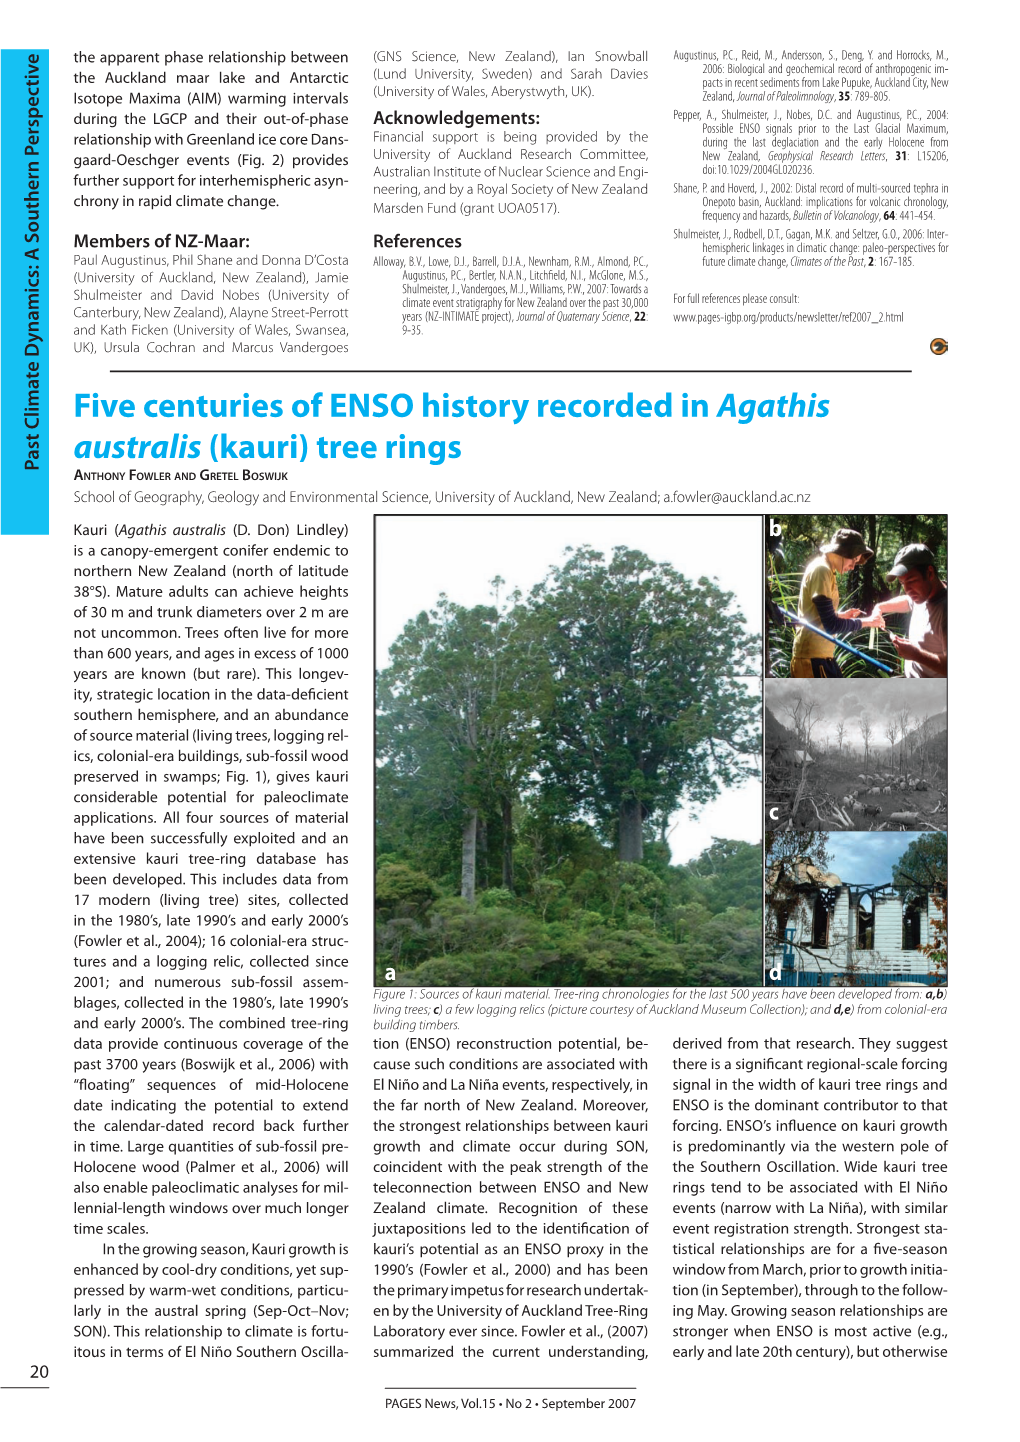 Five Centuries of ENSO History Recorded in Agathis Australis (Kauri